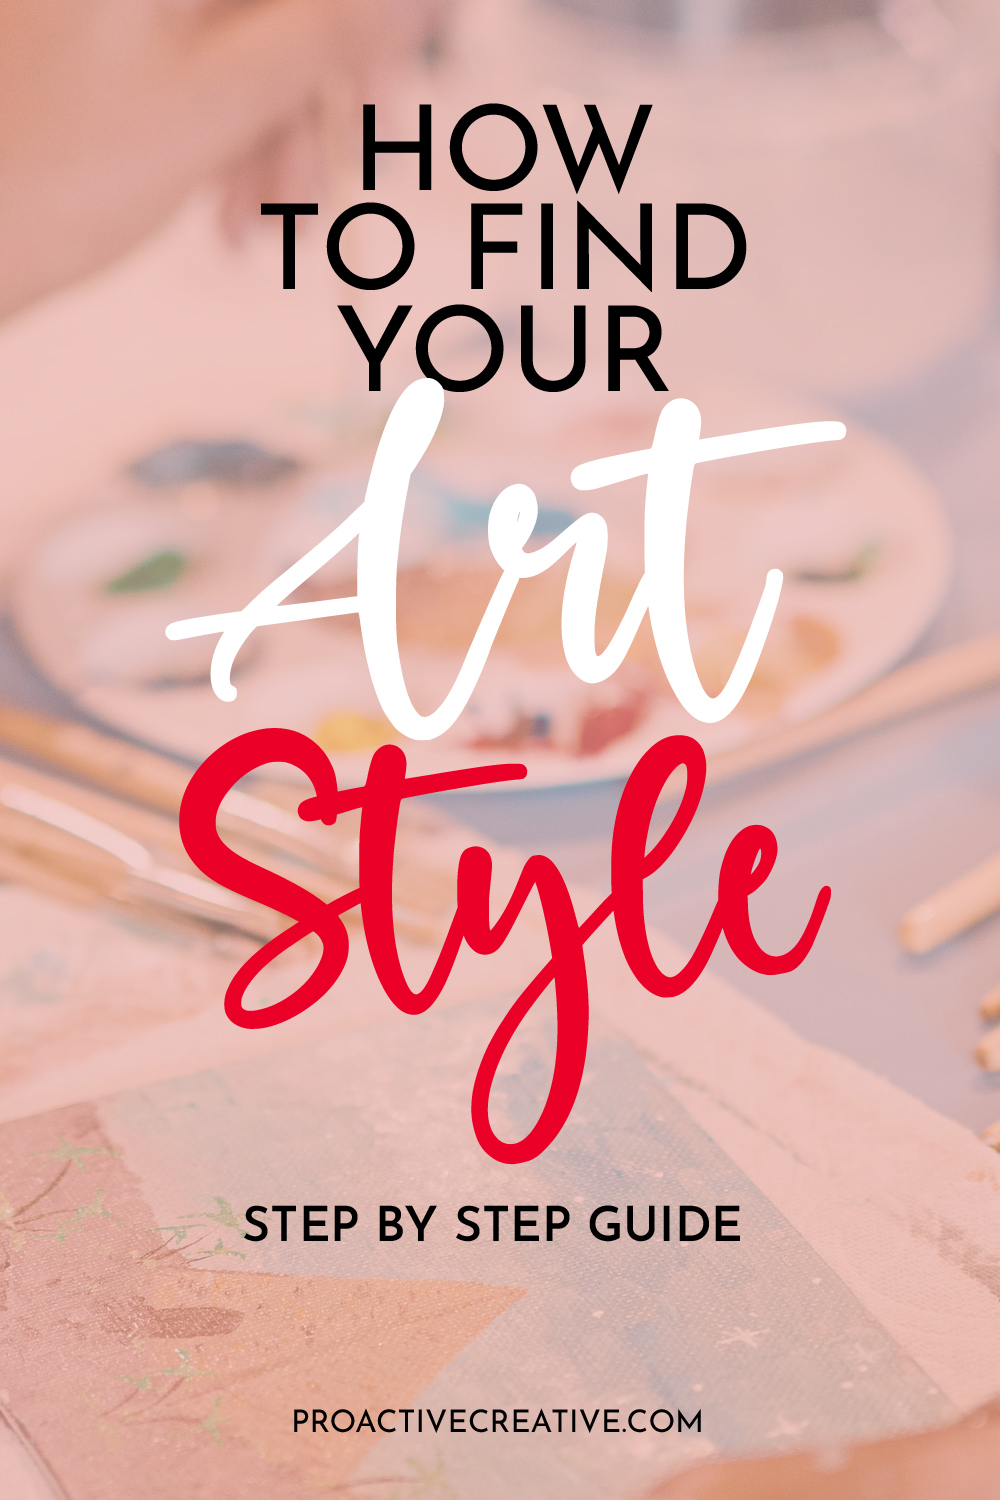 How to Find Your Unique Art Style - 9 Simple & Easy Key Steps